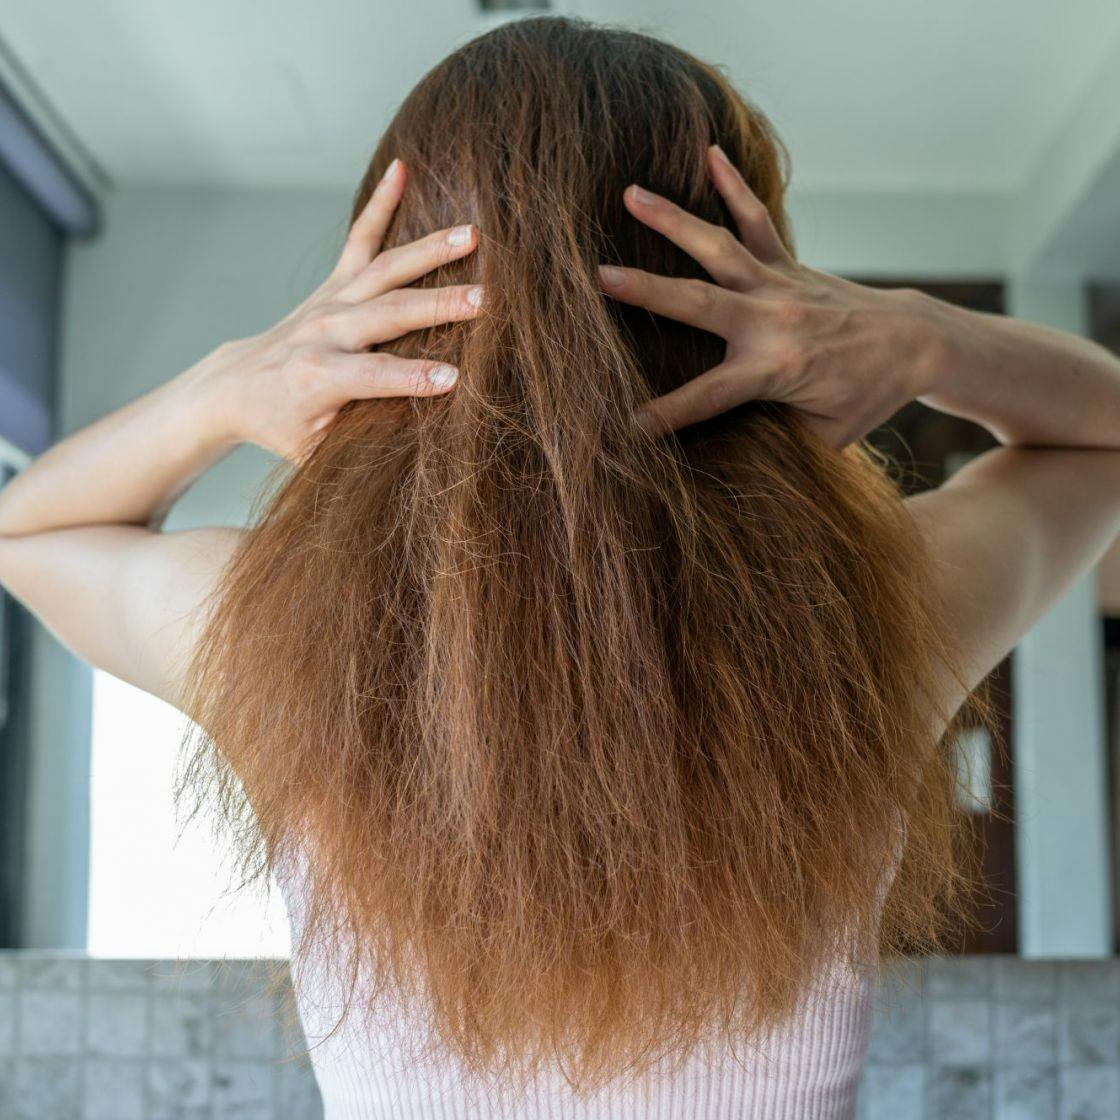 Why is my hair brittle and dry? What hair says about your health